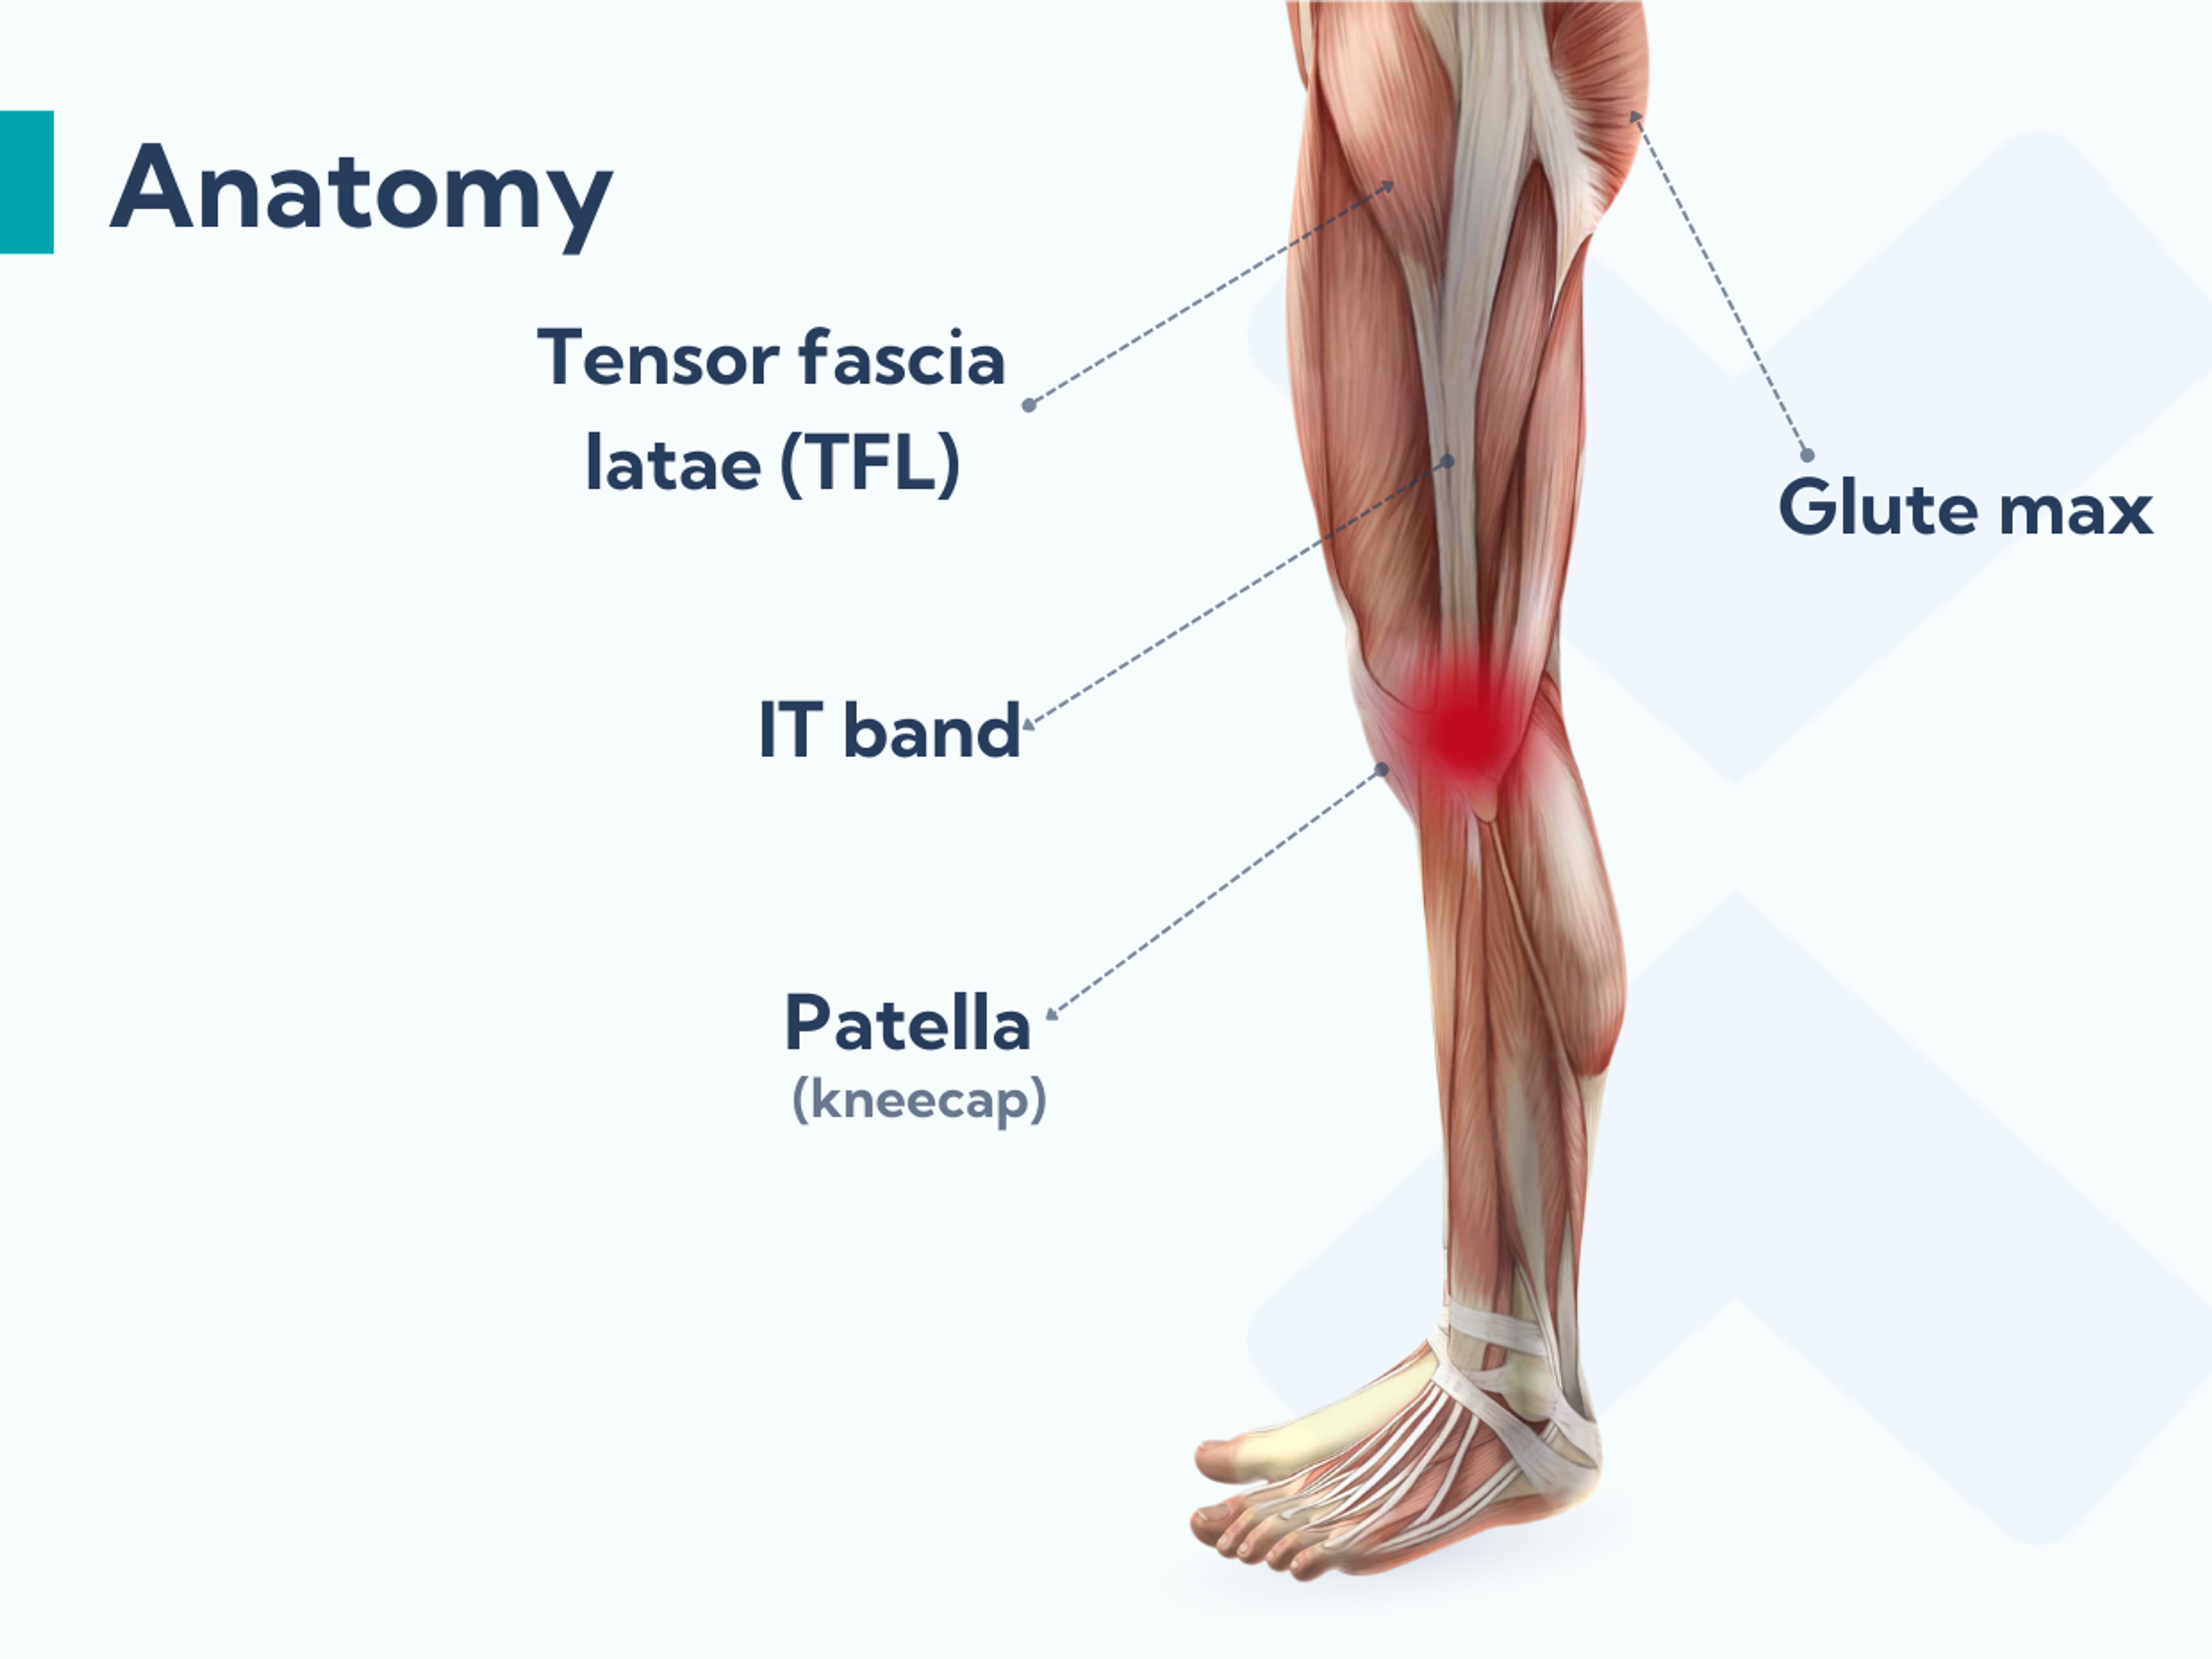 Anatomy of the IT band